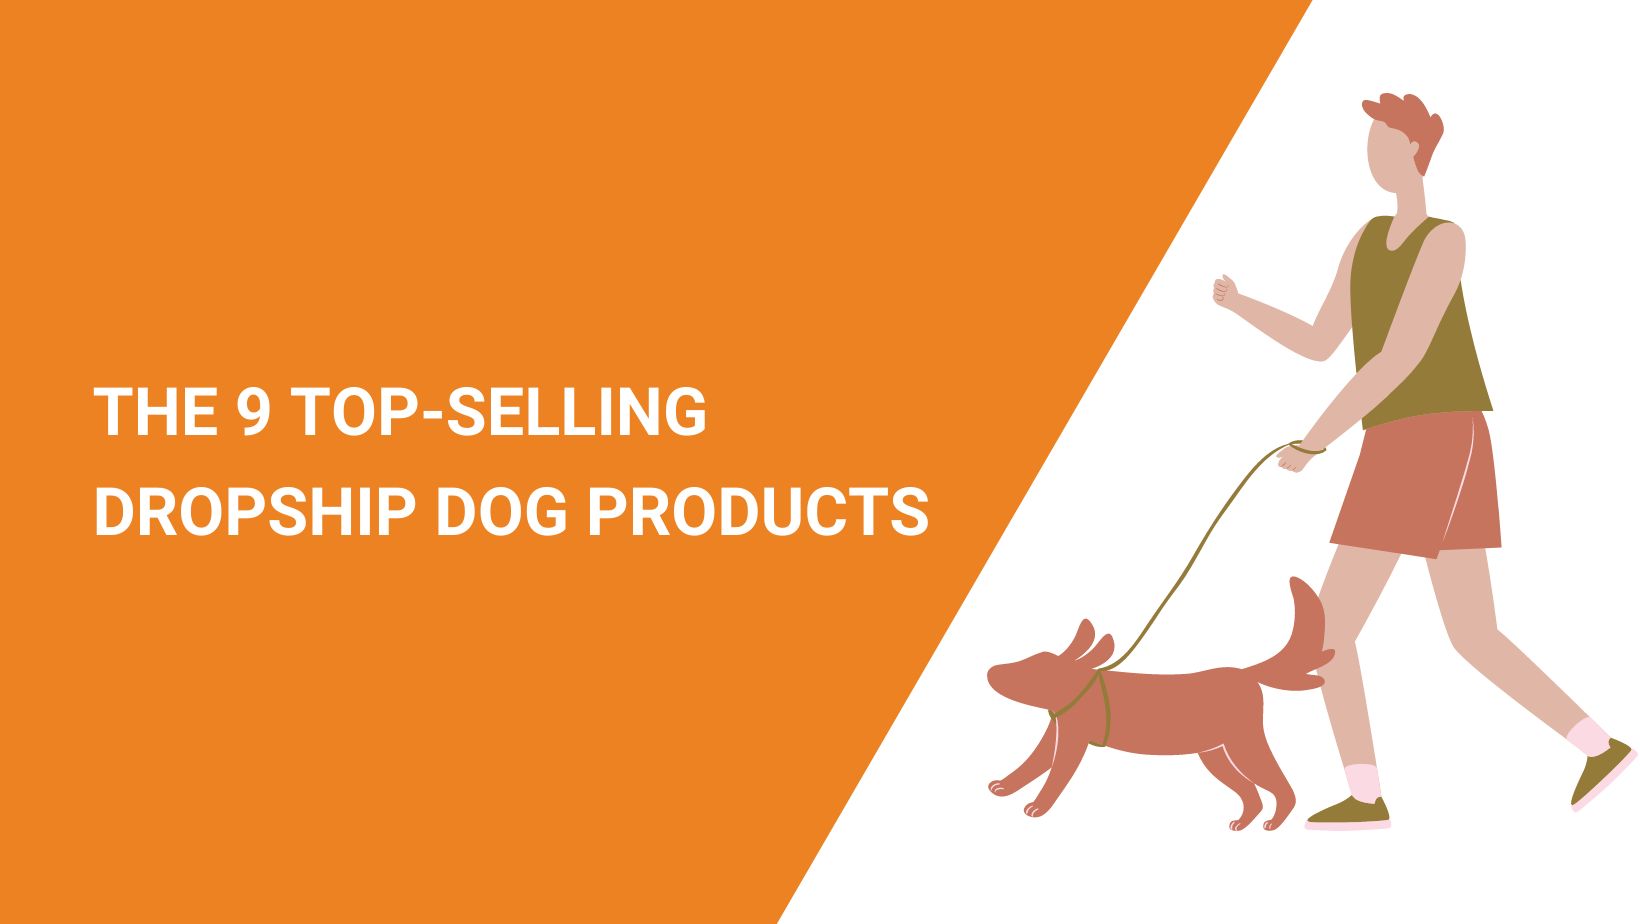 THE 9 TOP-SELLING DROPSHIP DOG PRODUCTS